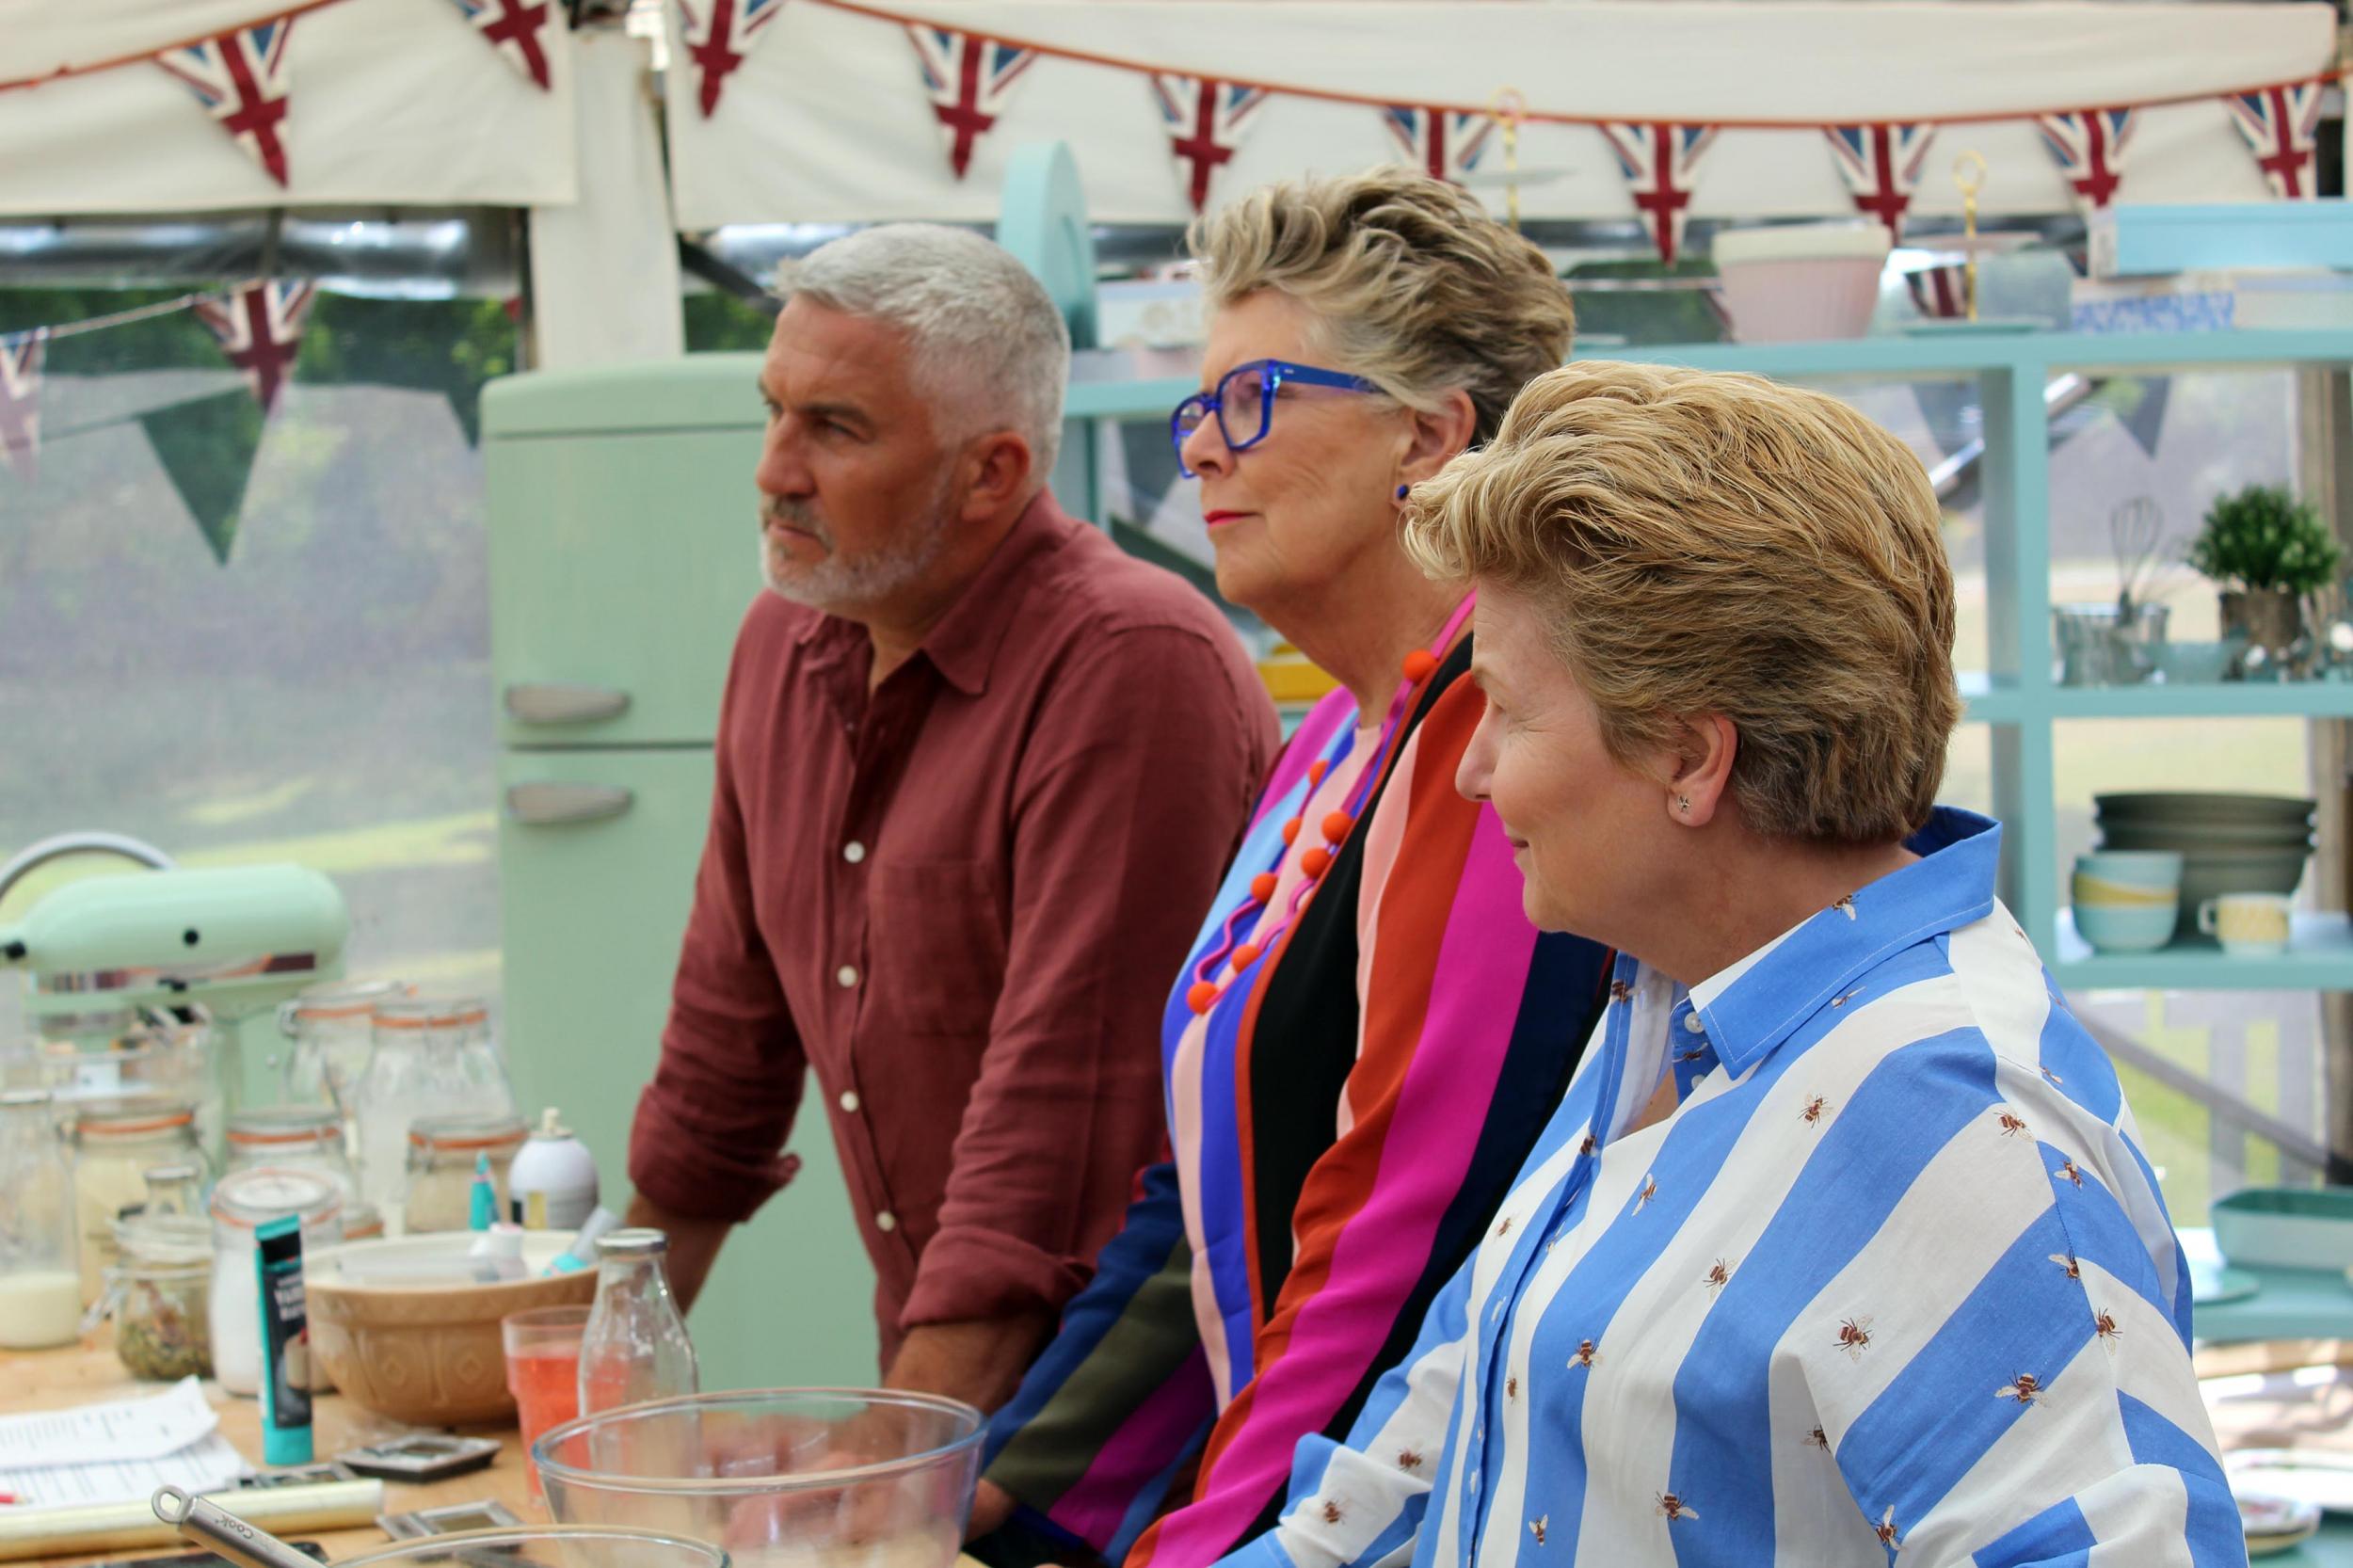 The nation now tunes in to the final of ‘The Great British Bake Off’